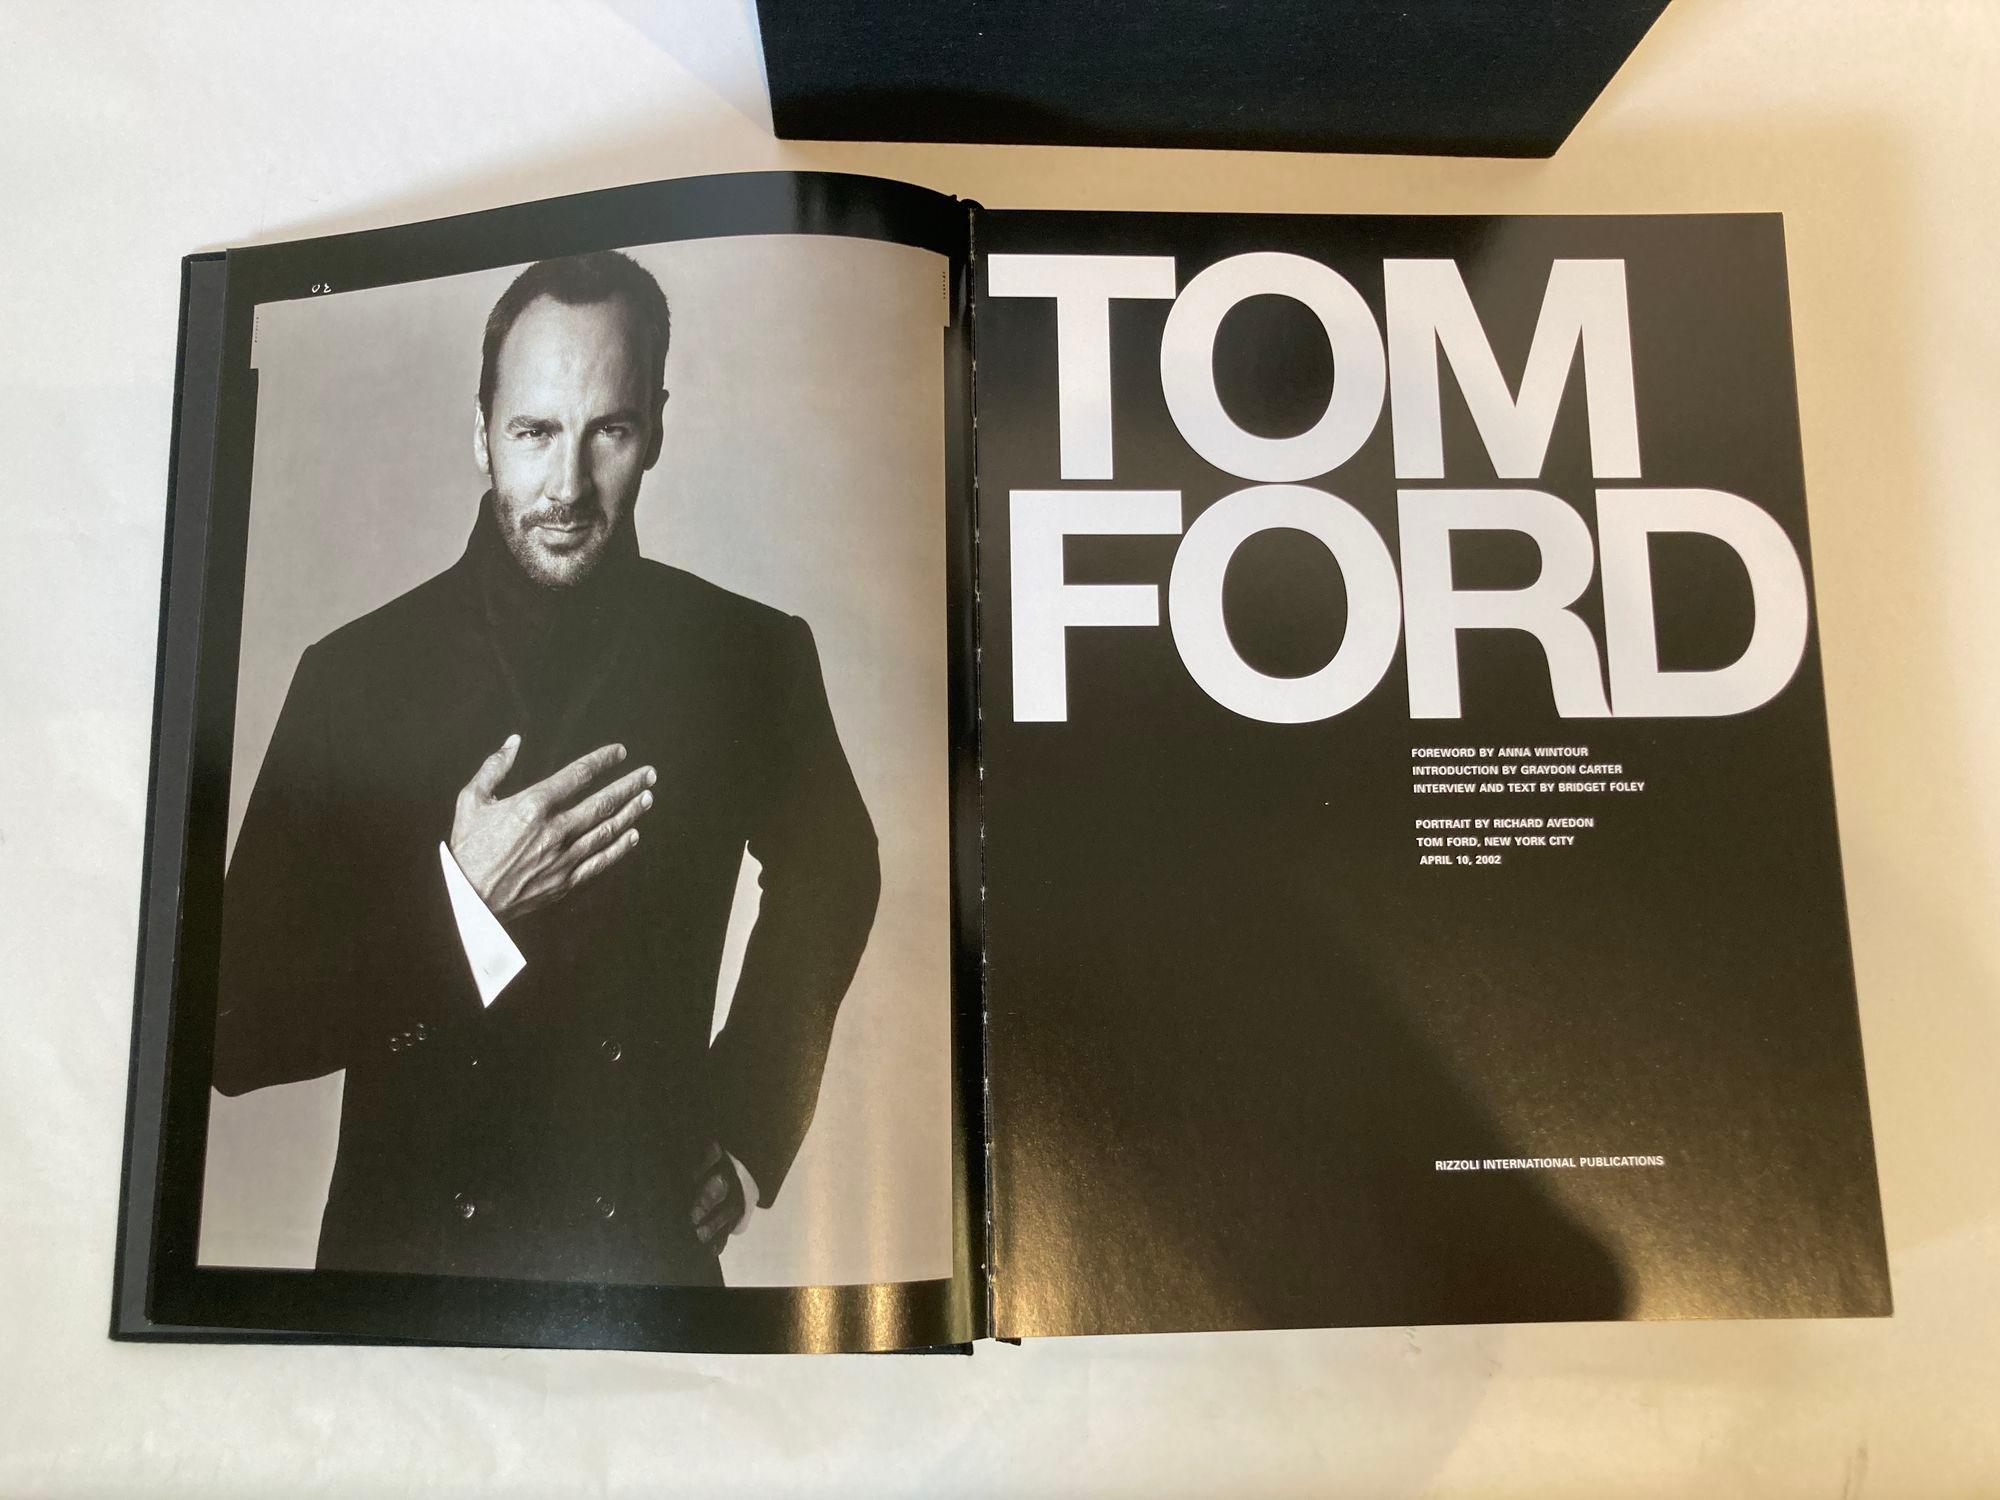 Deluxe Edition of Tom Ford's 2004 Book in slipcase. .
TOM FORD Oversized Coffee Table Book 2004 Published by Rizzoli.
First printing. First Edition.
The slipcase has some minor scuffing. The book has some minor wear, as expected from the age, size,